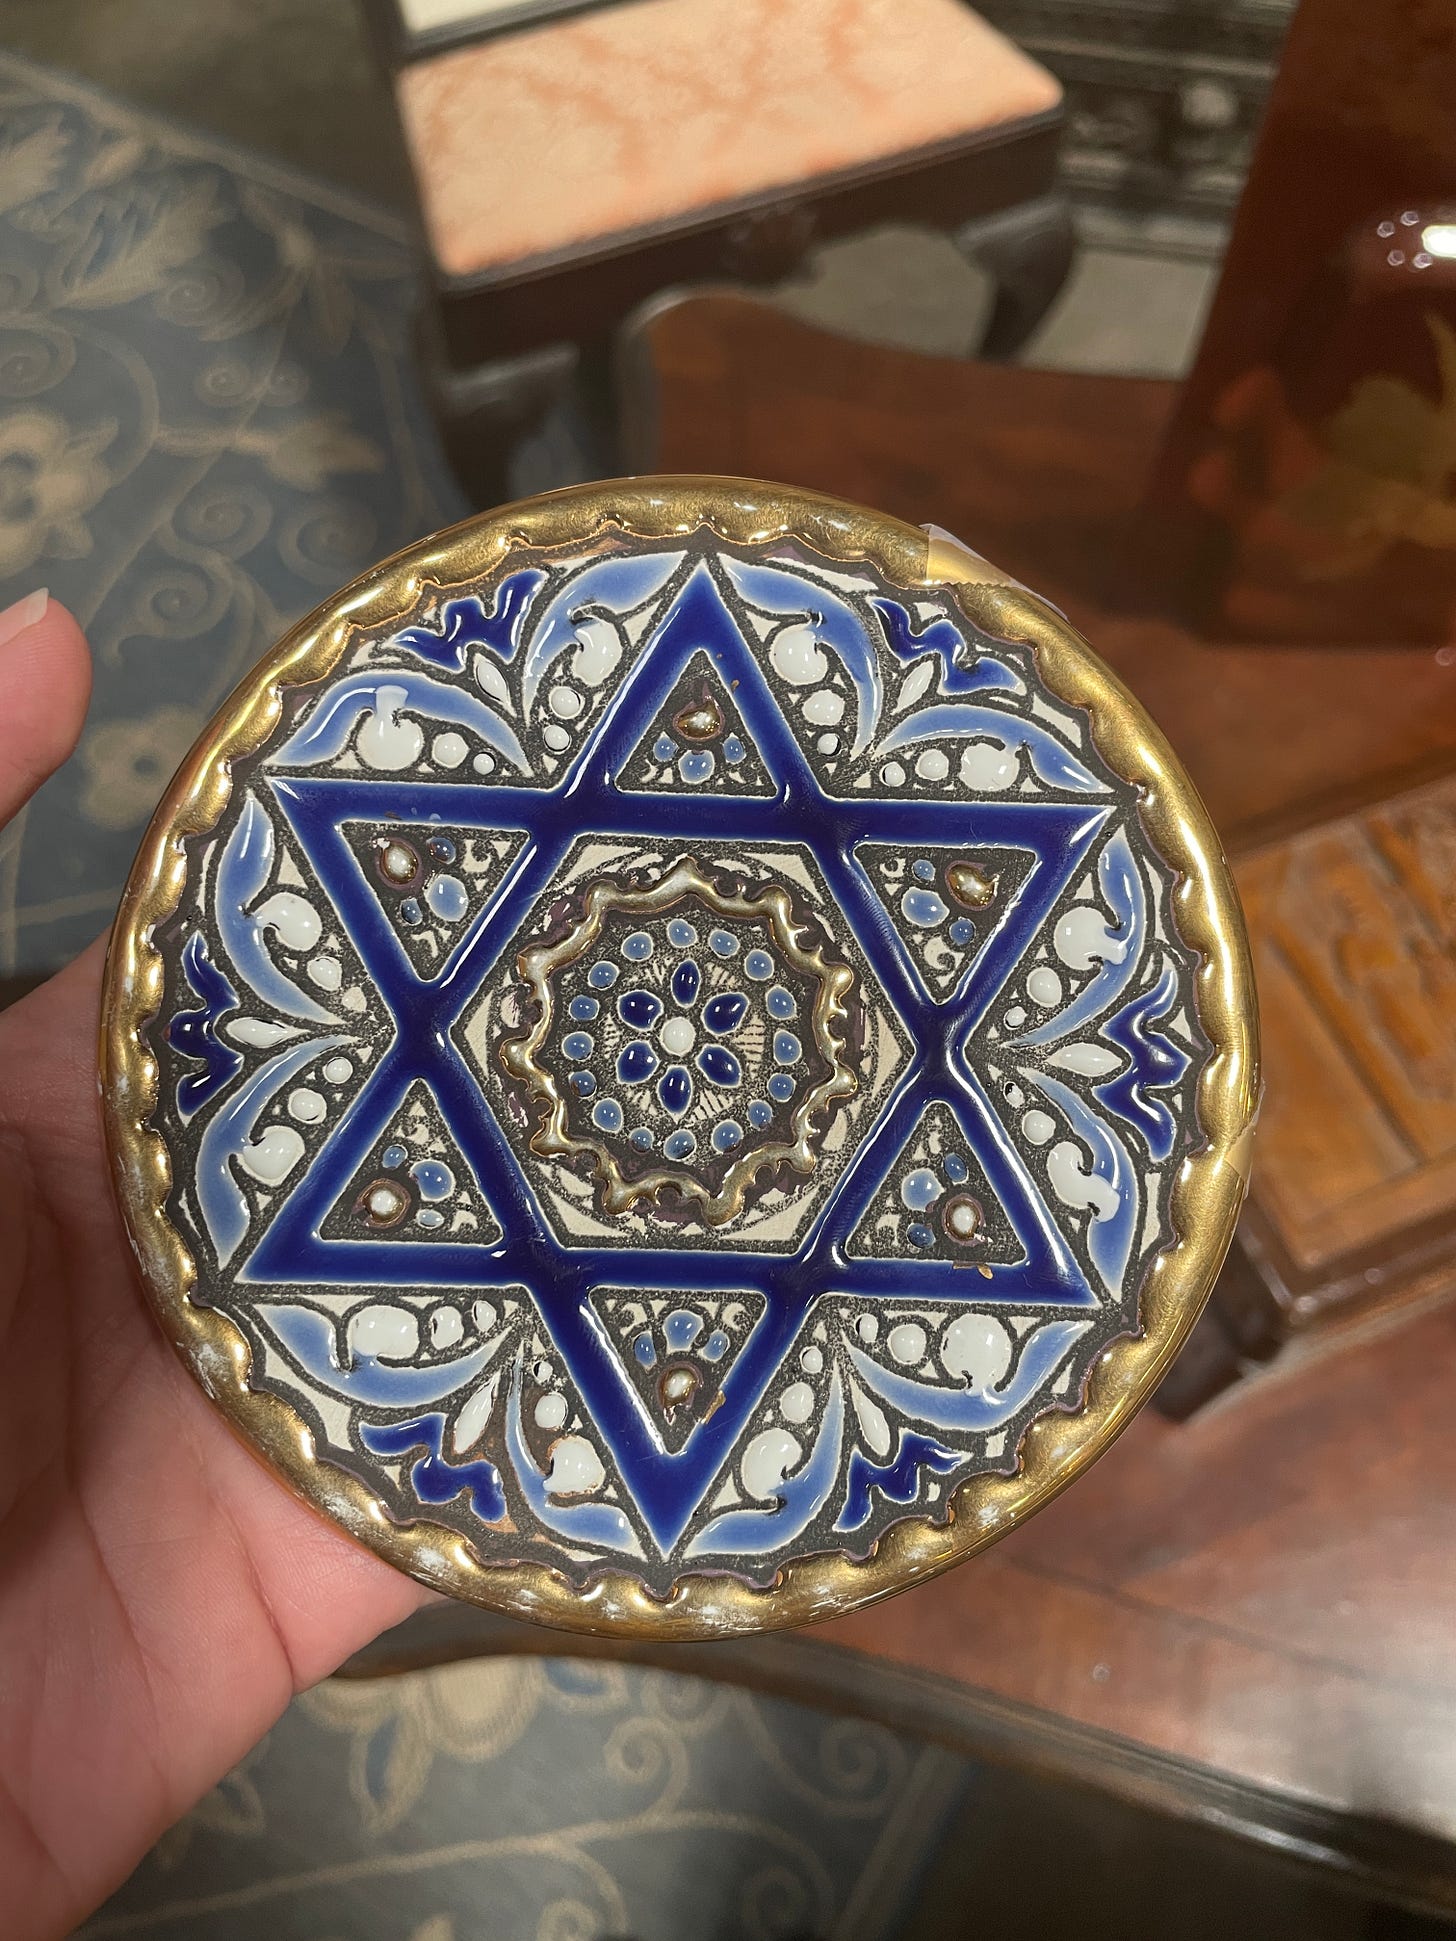 A Spanish Star of David plate. It is gold, blue, and silver.